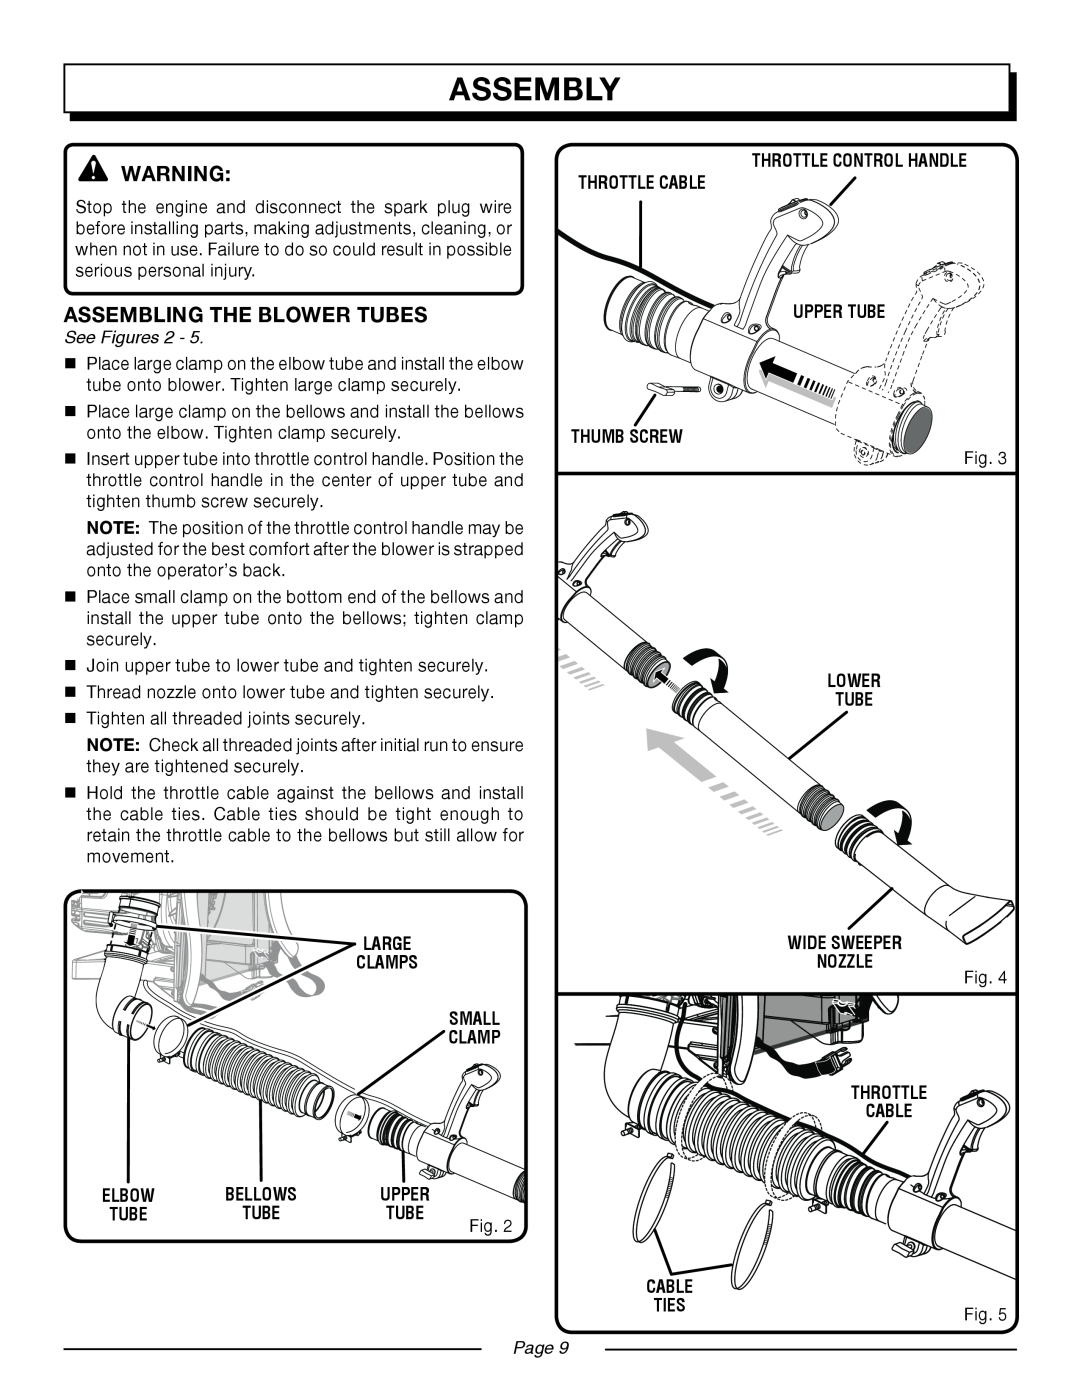 Homelite UT08580 Assembling The Blower Tubes, assembly, See Figures, small clamp, elbow, bellows, upper, tube, cable, ties 